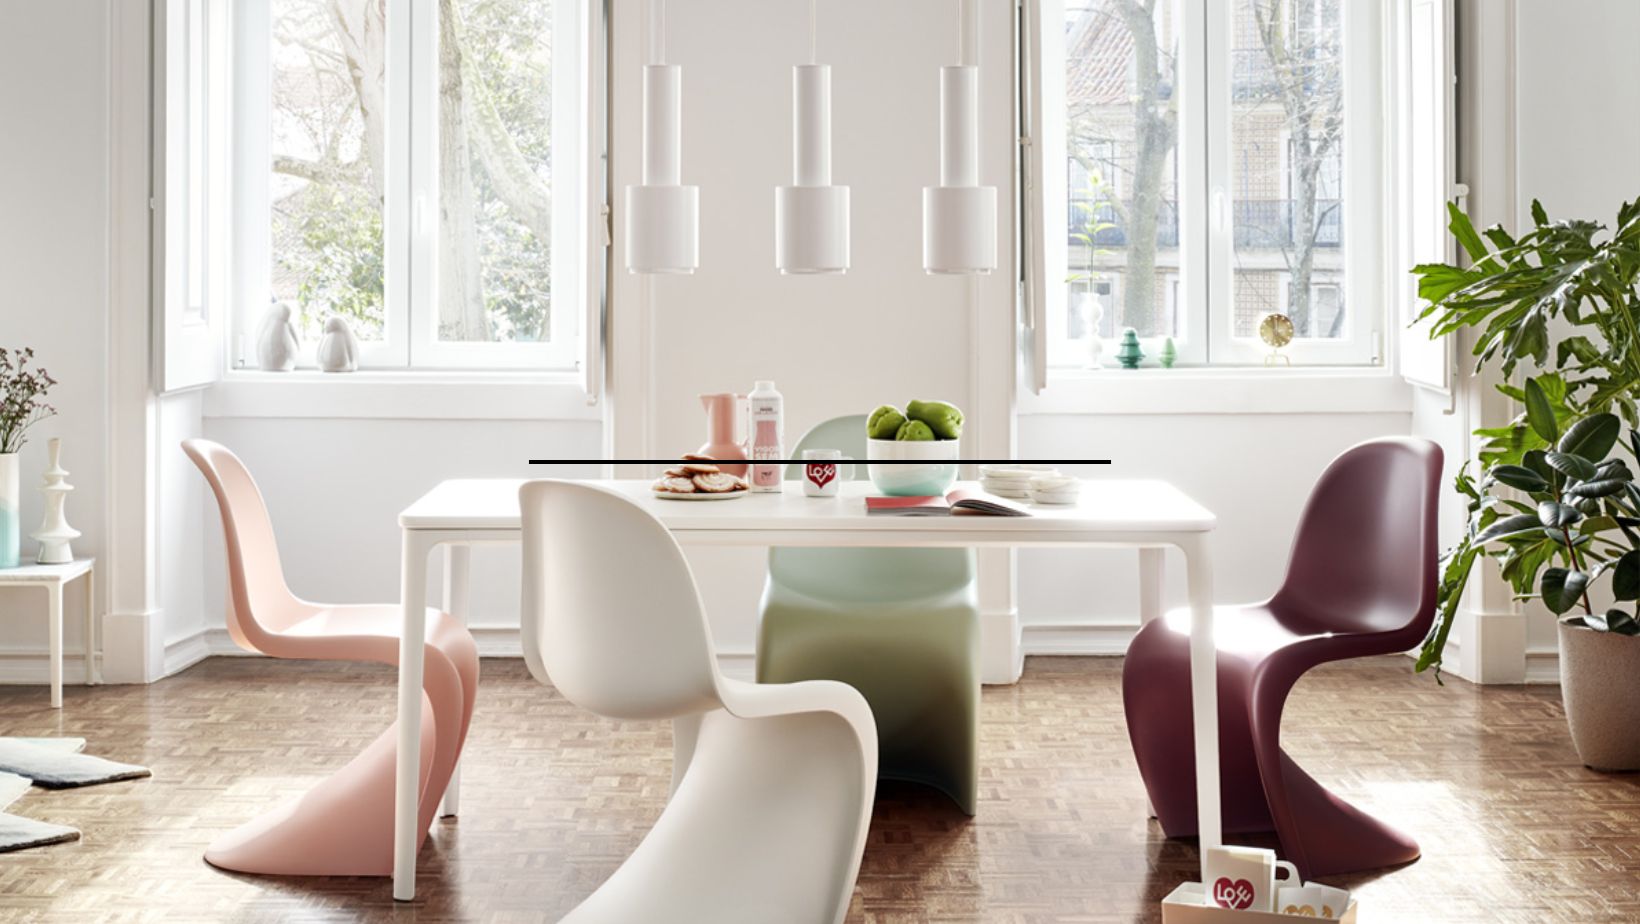 Why Are Pantone Chairs Popular?